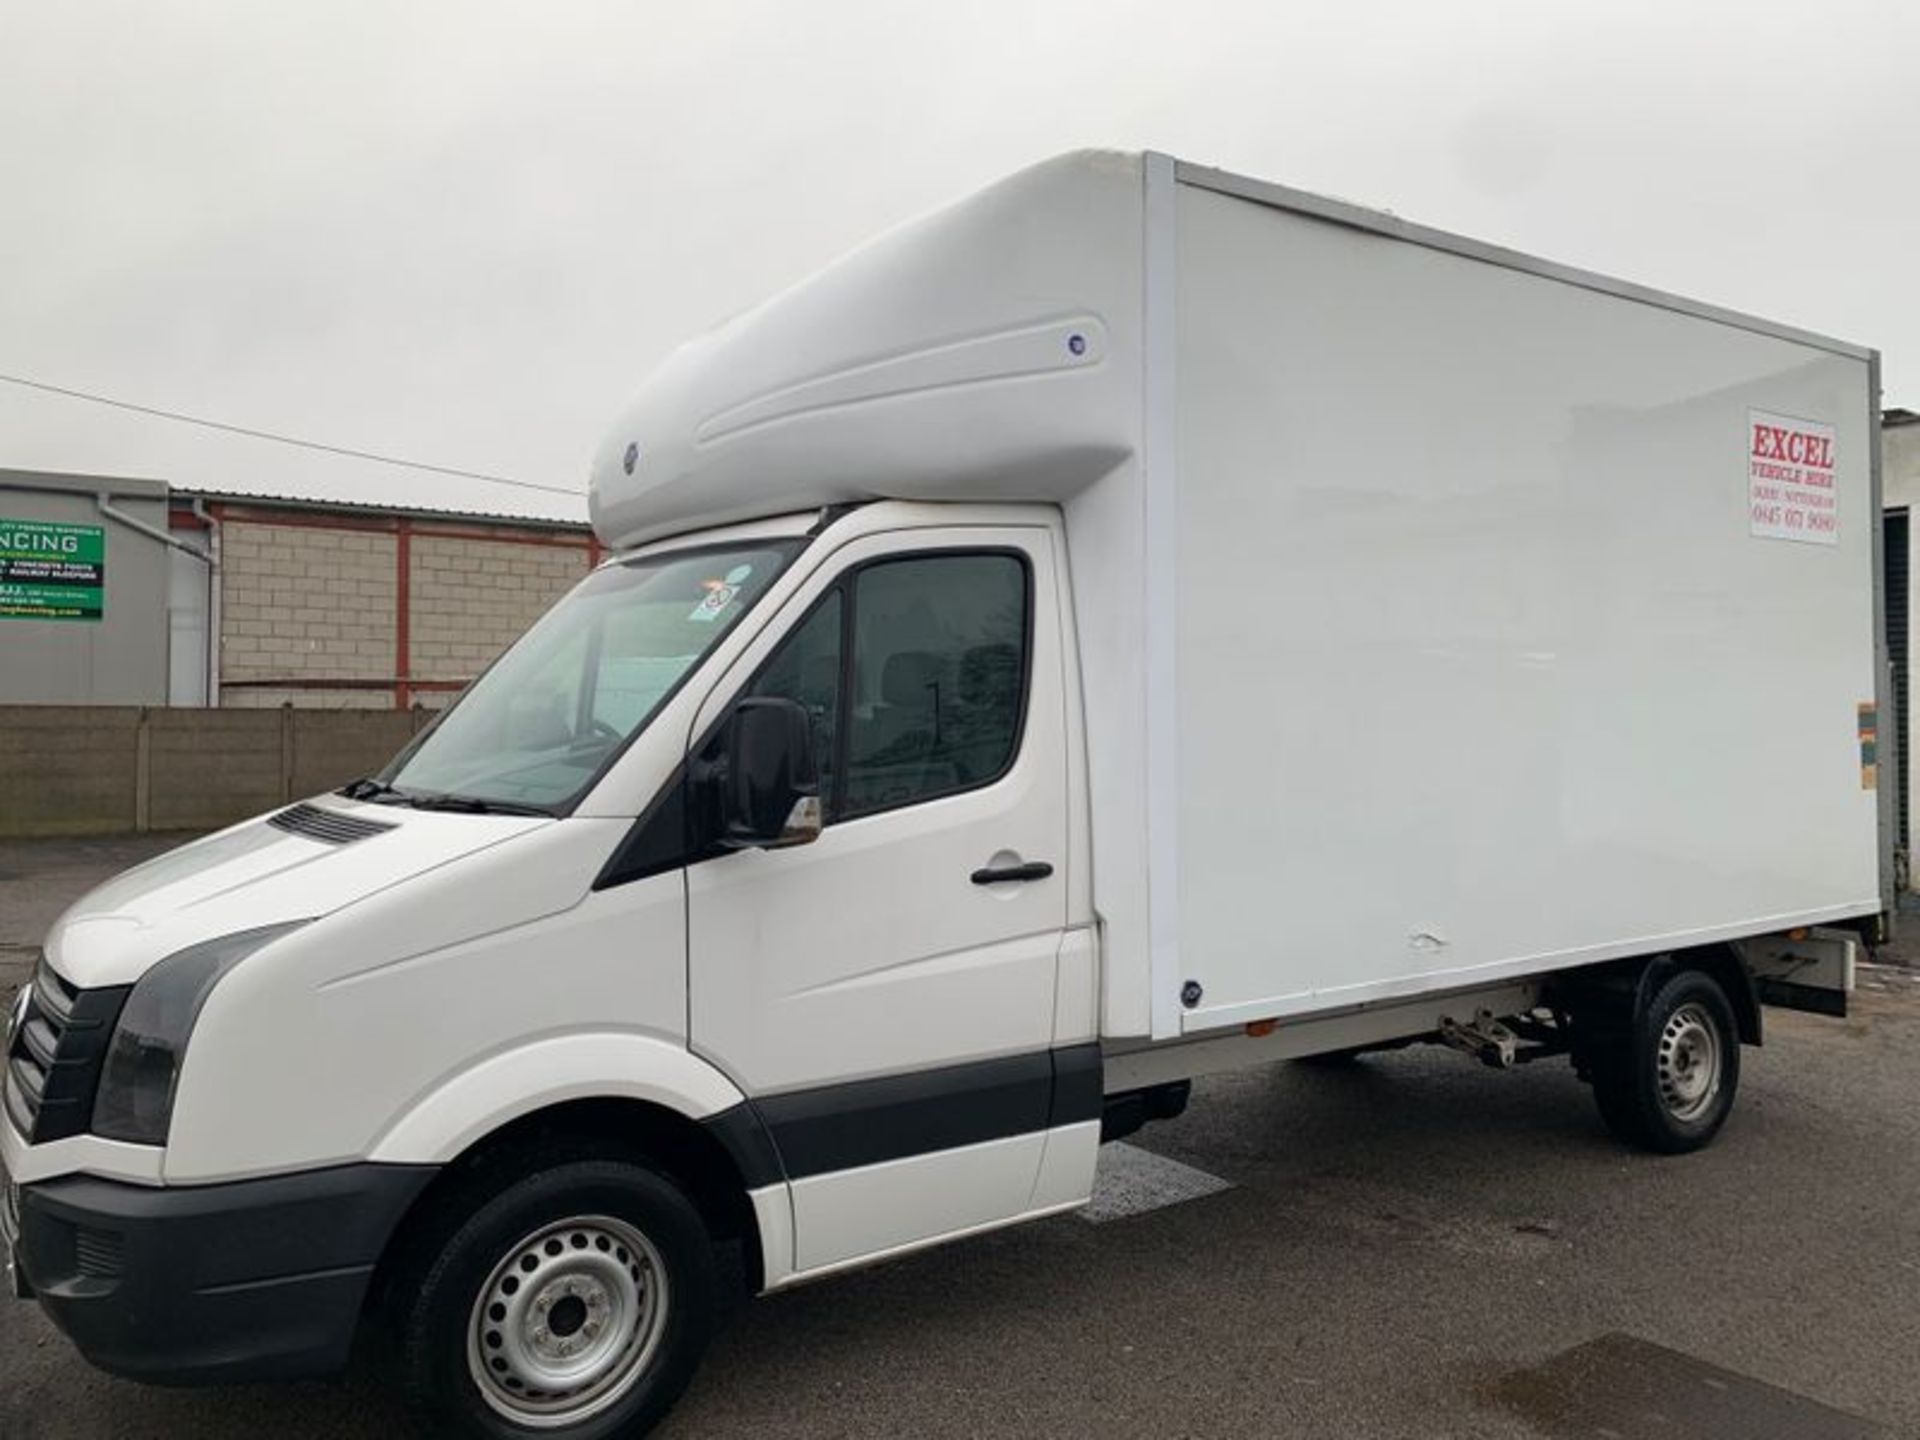 (ON SALE) VW CRAFTER CR35 2.0TDI "LWB"LUTON BOX VAN WITH ELECTRIC TAIL LIFT(16 REG)1 OWNER LOW MILES